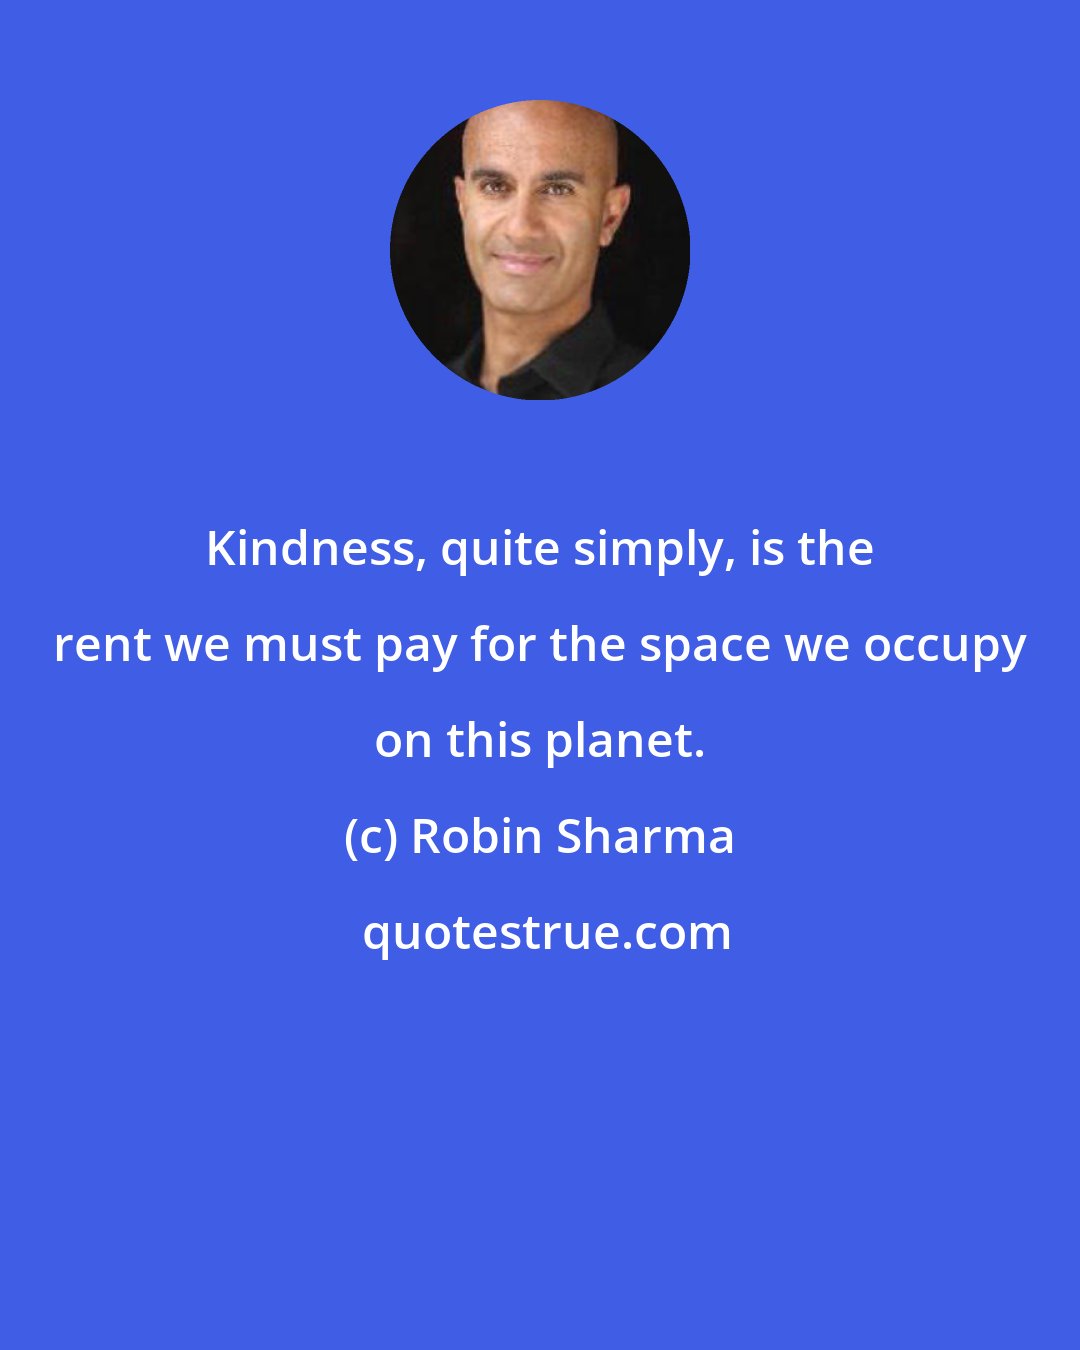 Robin Sharma: Kindness, quite simply, is the rent we must pay for the space we occupy on this planet.